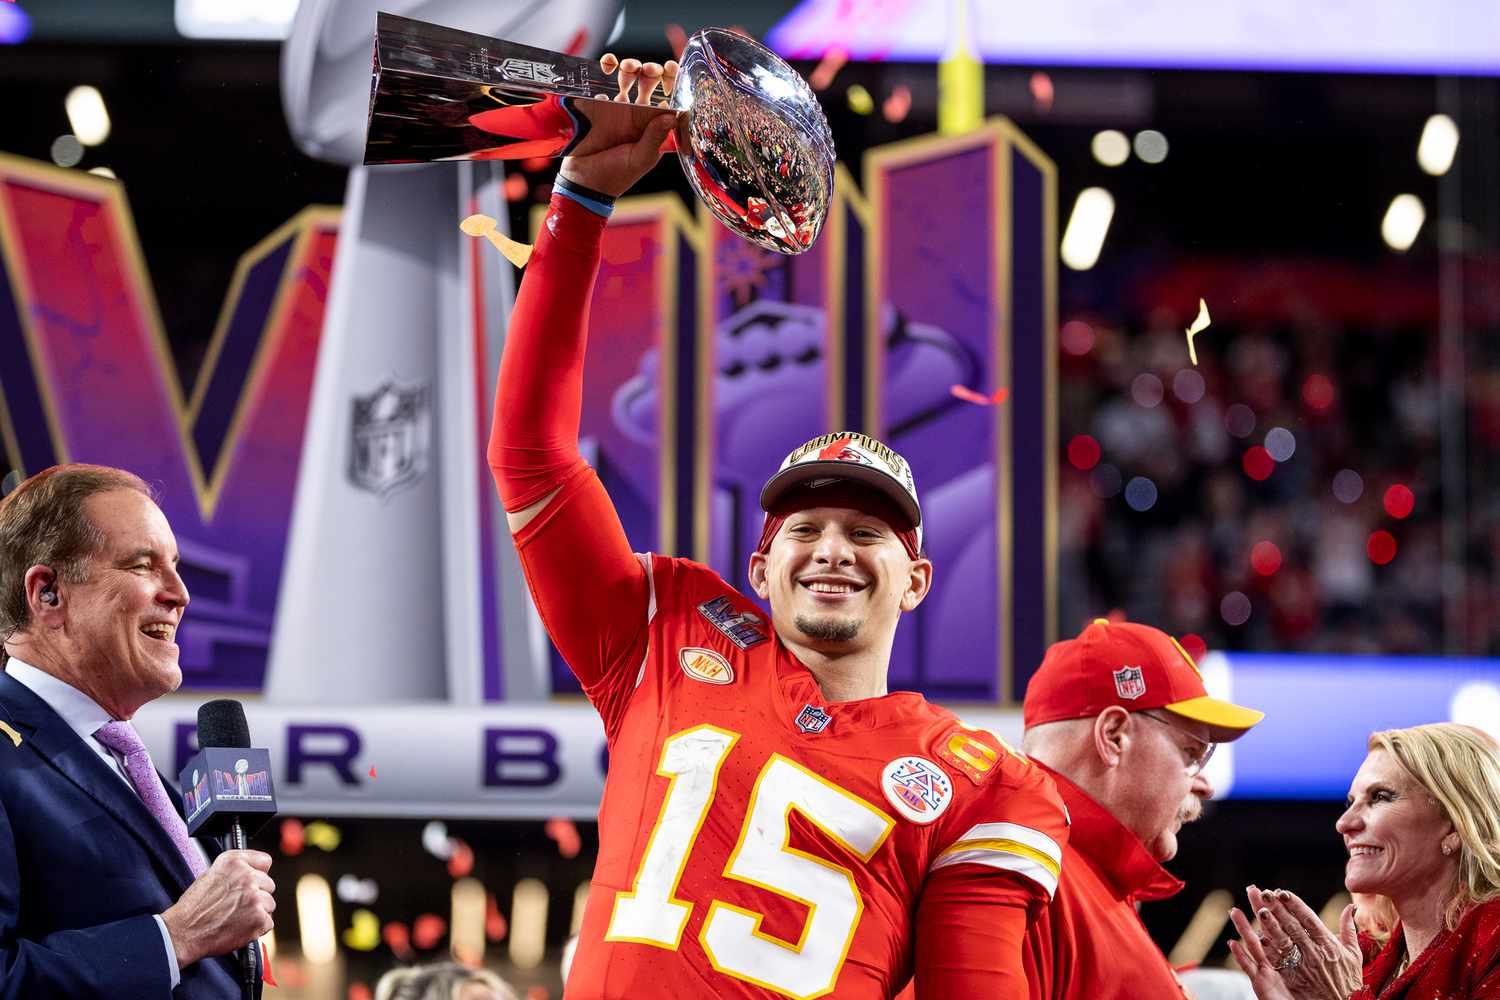 Question TO The Fans: Does  Patrick Mahomes  deserve to call the gratest of all (Goat)?? Let the fans and Voters consider